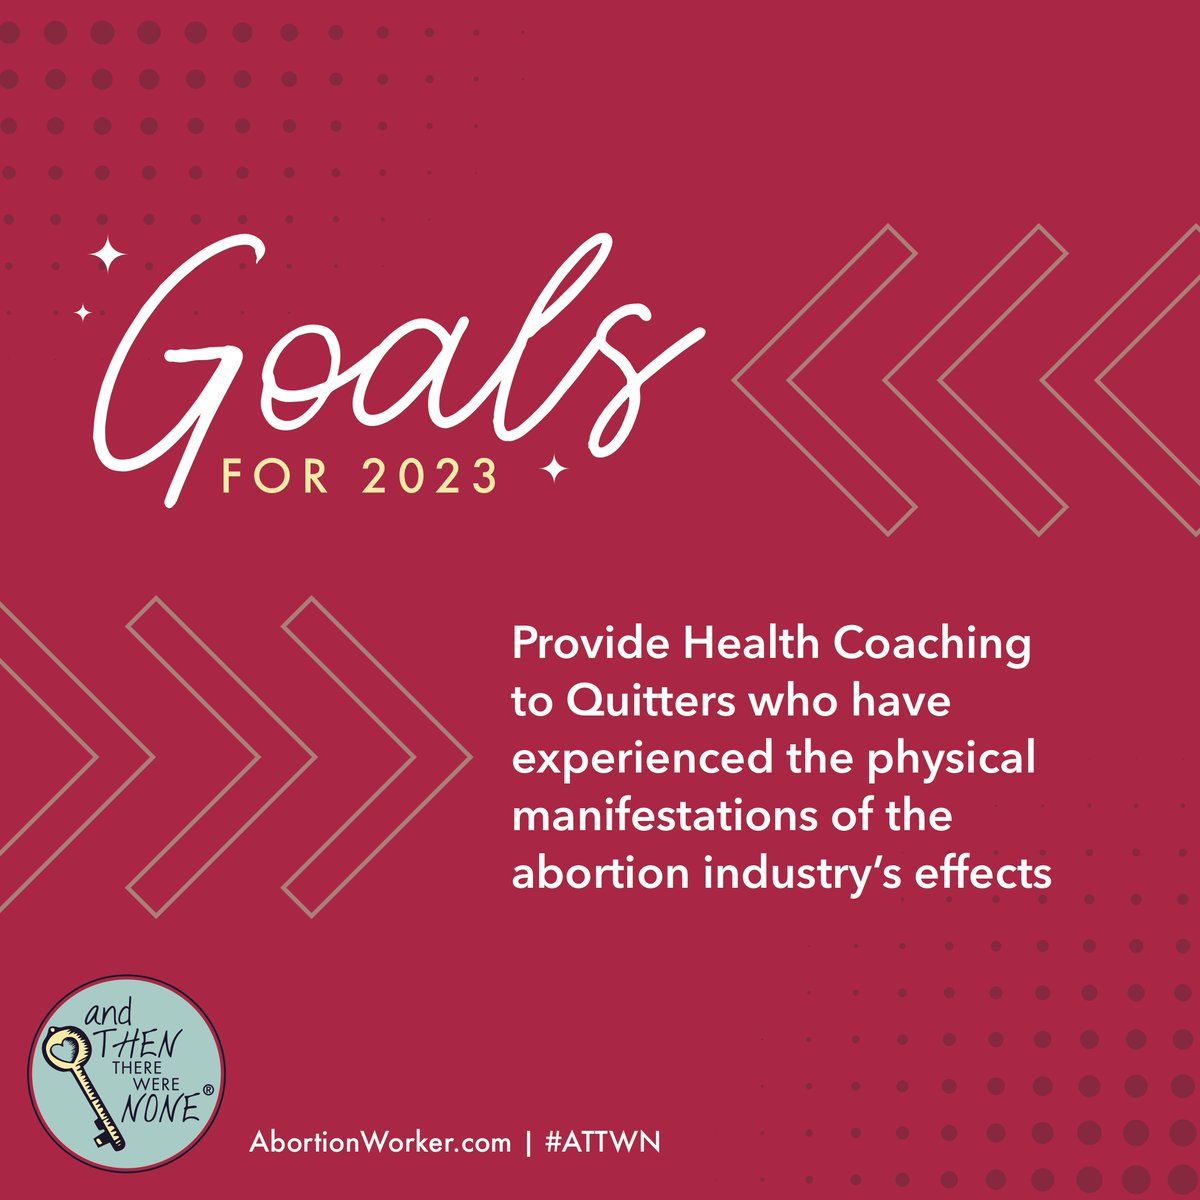 Our newest client manager on staff is also a certified health coach! 

We’ll never forget one of our first clients. She didn’t want to accept our offer of financial assistance, but she did say that the abortion clinic had taken such a toll on her physical health that none of her